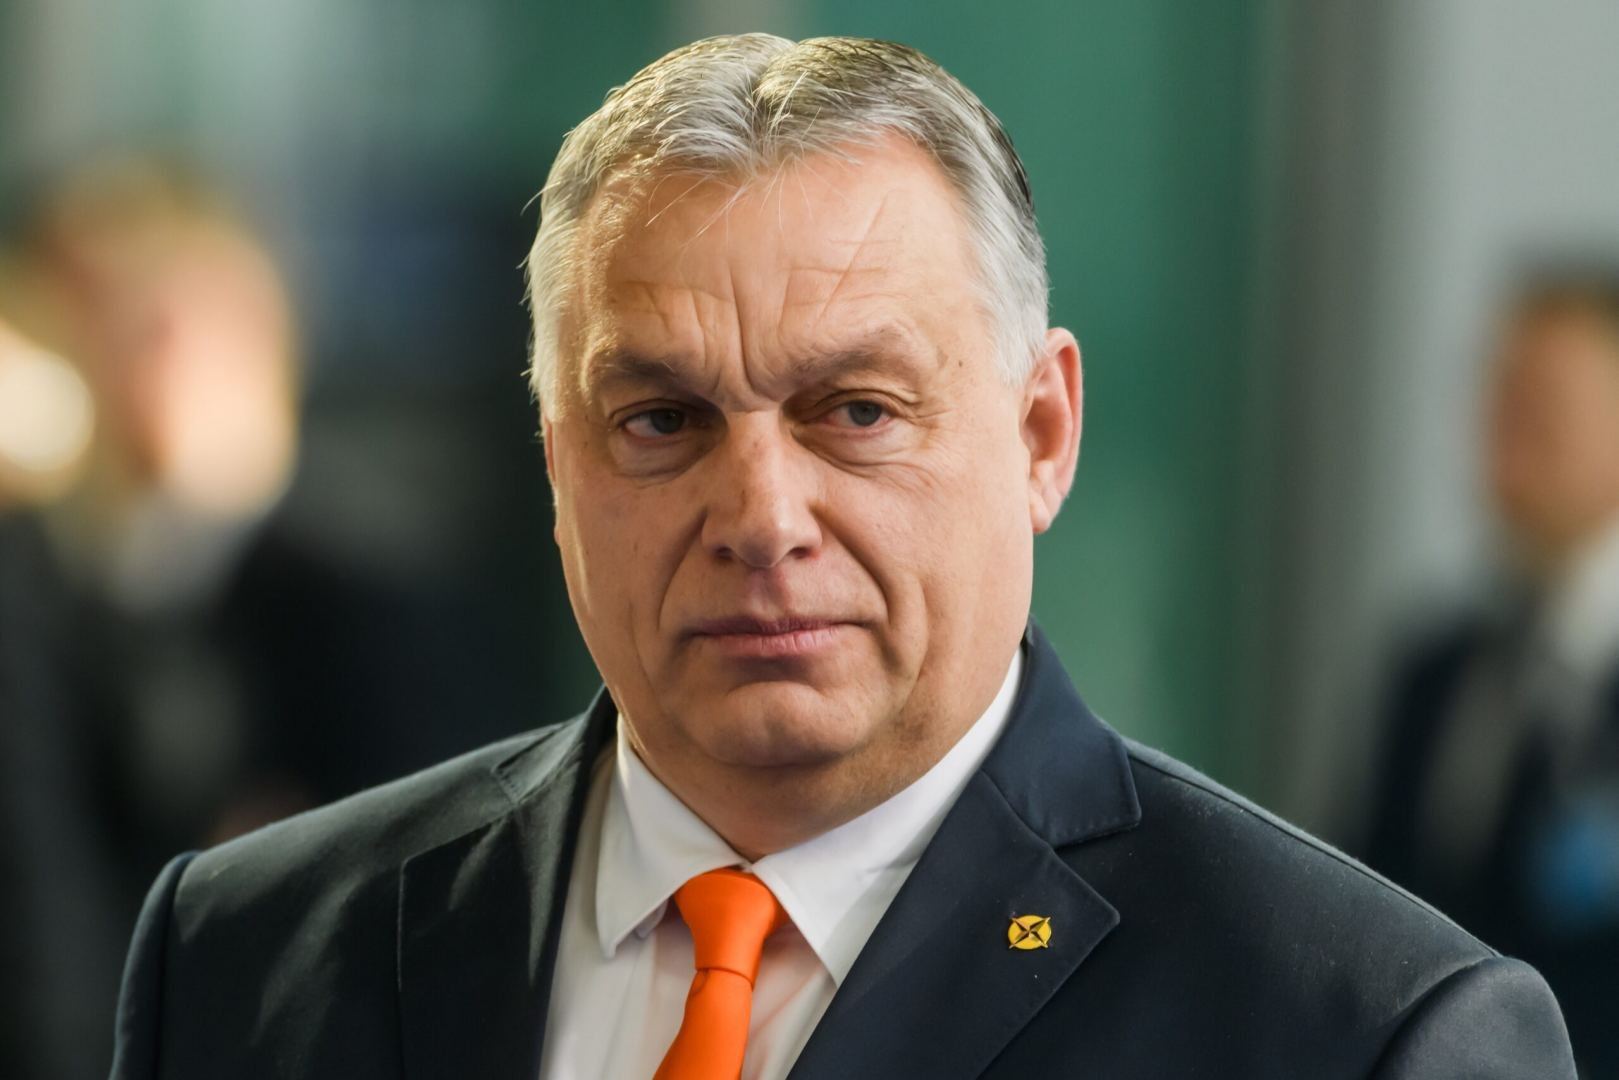 Hungary sees great potential in relations dev't with Kazakhstan - PM